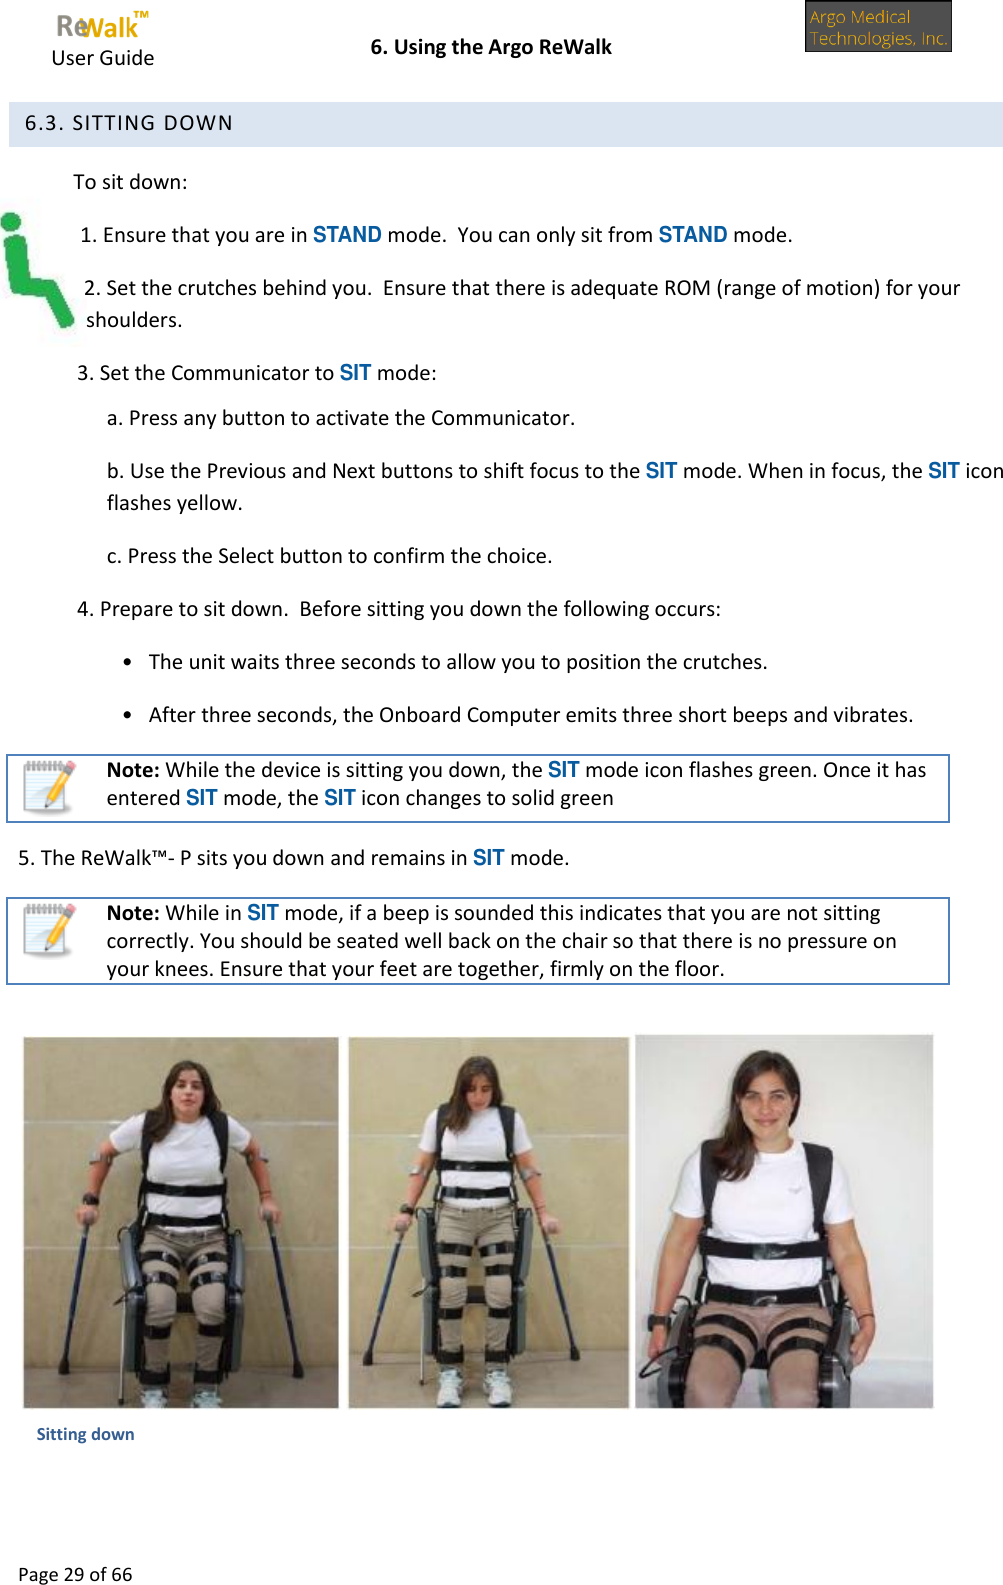     User Guide    6. Using the Argo ReWalk  Page 29 of 66   6.3. SITTING DOWN To sit down: 1. Ensure that you are in STAND mode.  You can only sit from STAND mode. 2. Set the crutches behind you.  Ensure that there is adequate ROM (range of motion) for your shoulders. 3. Set the Communicator to SIT mode: a. Press any button to activate the Communicator. b. Use the Previous and Next buttons to shift focus to the SIT mode. When in focus, the SIT icon flashes yellow. c. Press the Select button to confirm the choice. 4. Prepare to sit down.  Before sitting you down the following occurs: •   The unit waits three seconds to allow you to position the crutches. •   After three seconds, the Onboard Computer emits three short beeps and vibrates.  Note: While the device is sitting you down, the SIT mode icon flashes green. Once it has entered SIT mode, the SIT icon changes to solid green 5. The ReWalk™- P sits you down and remains in SIT mode.  Note: While in SIT mode, if a beep is sounded this indicates that you are not sitting correctly. You should be seated well back on the chair so that there is no pressure on your knees. Ensure that your feet are together, firmly on the floor.   Sitting down 